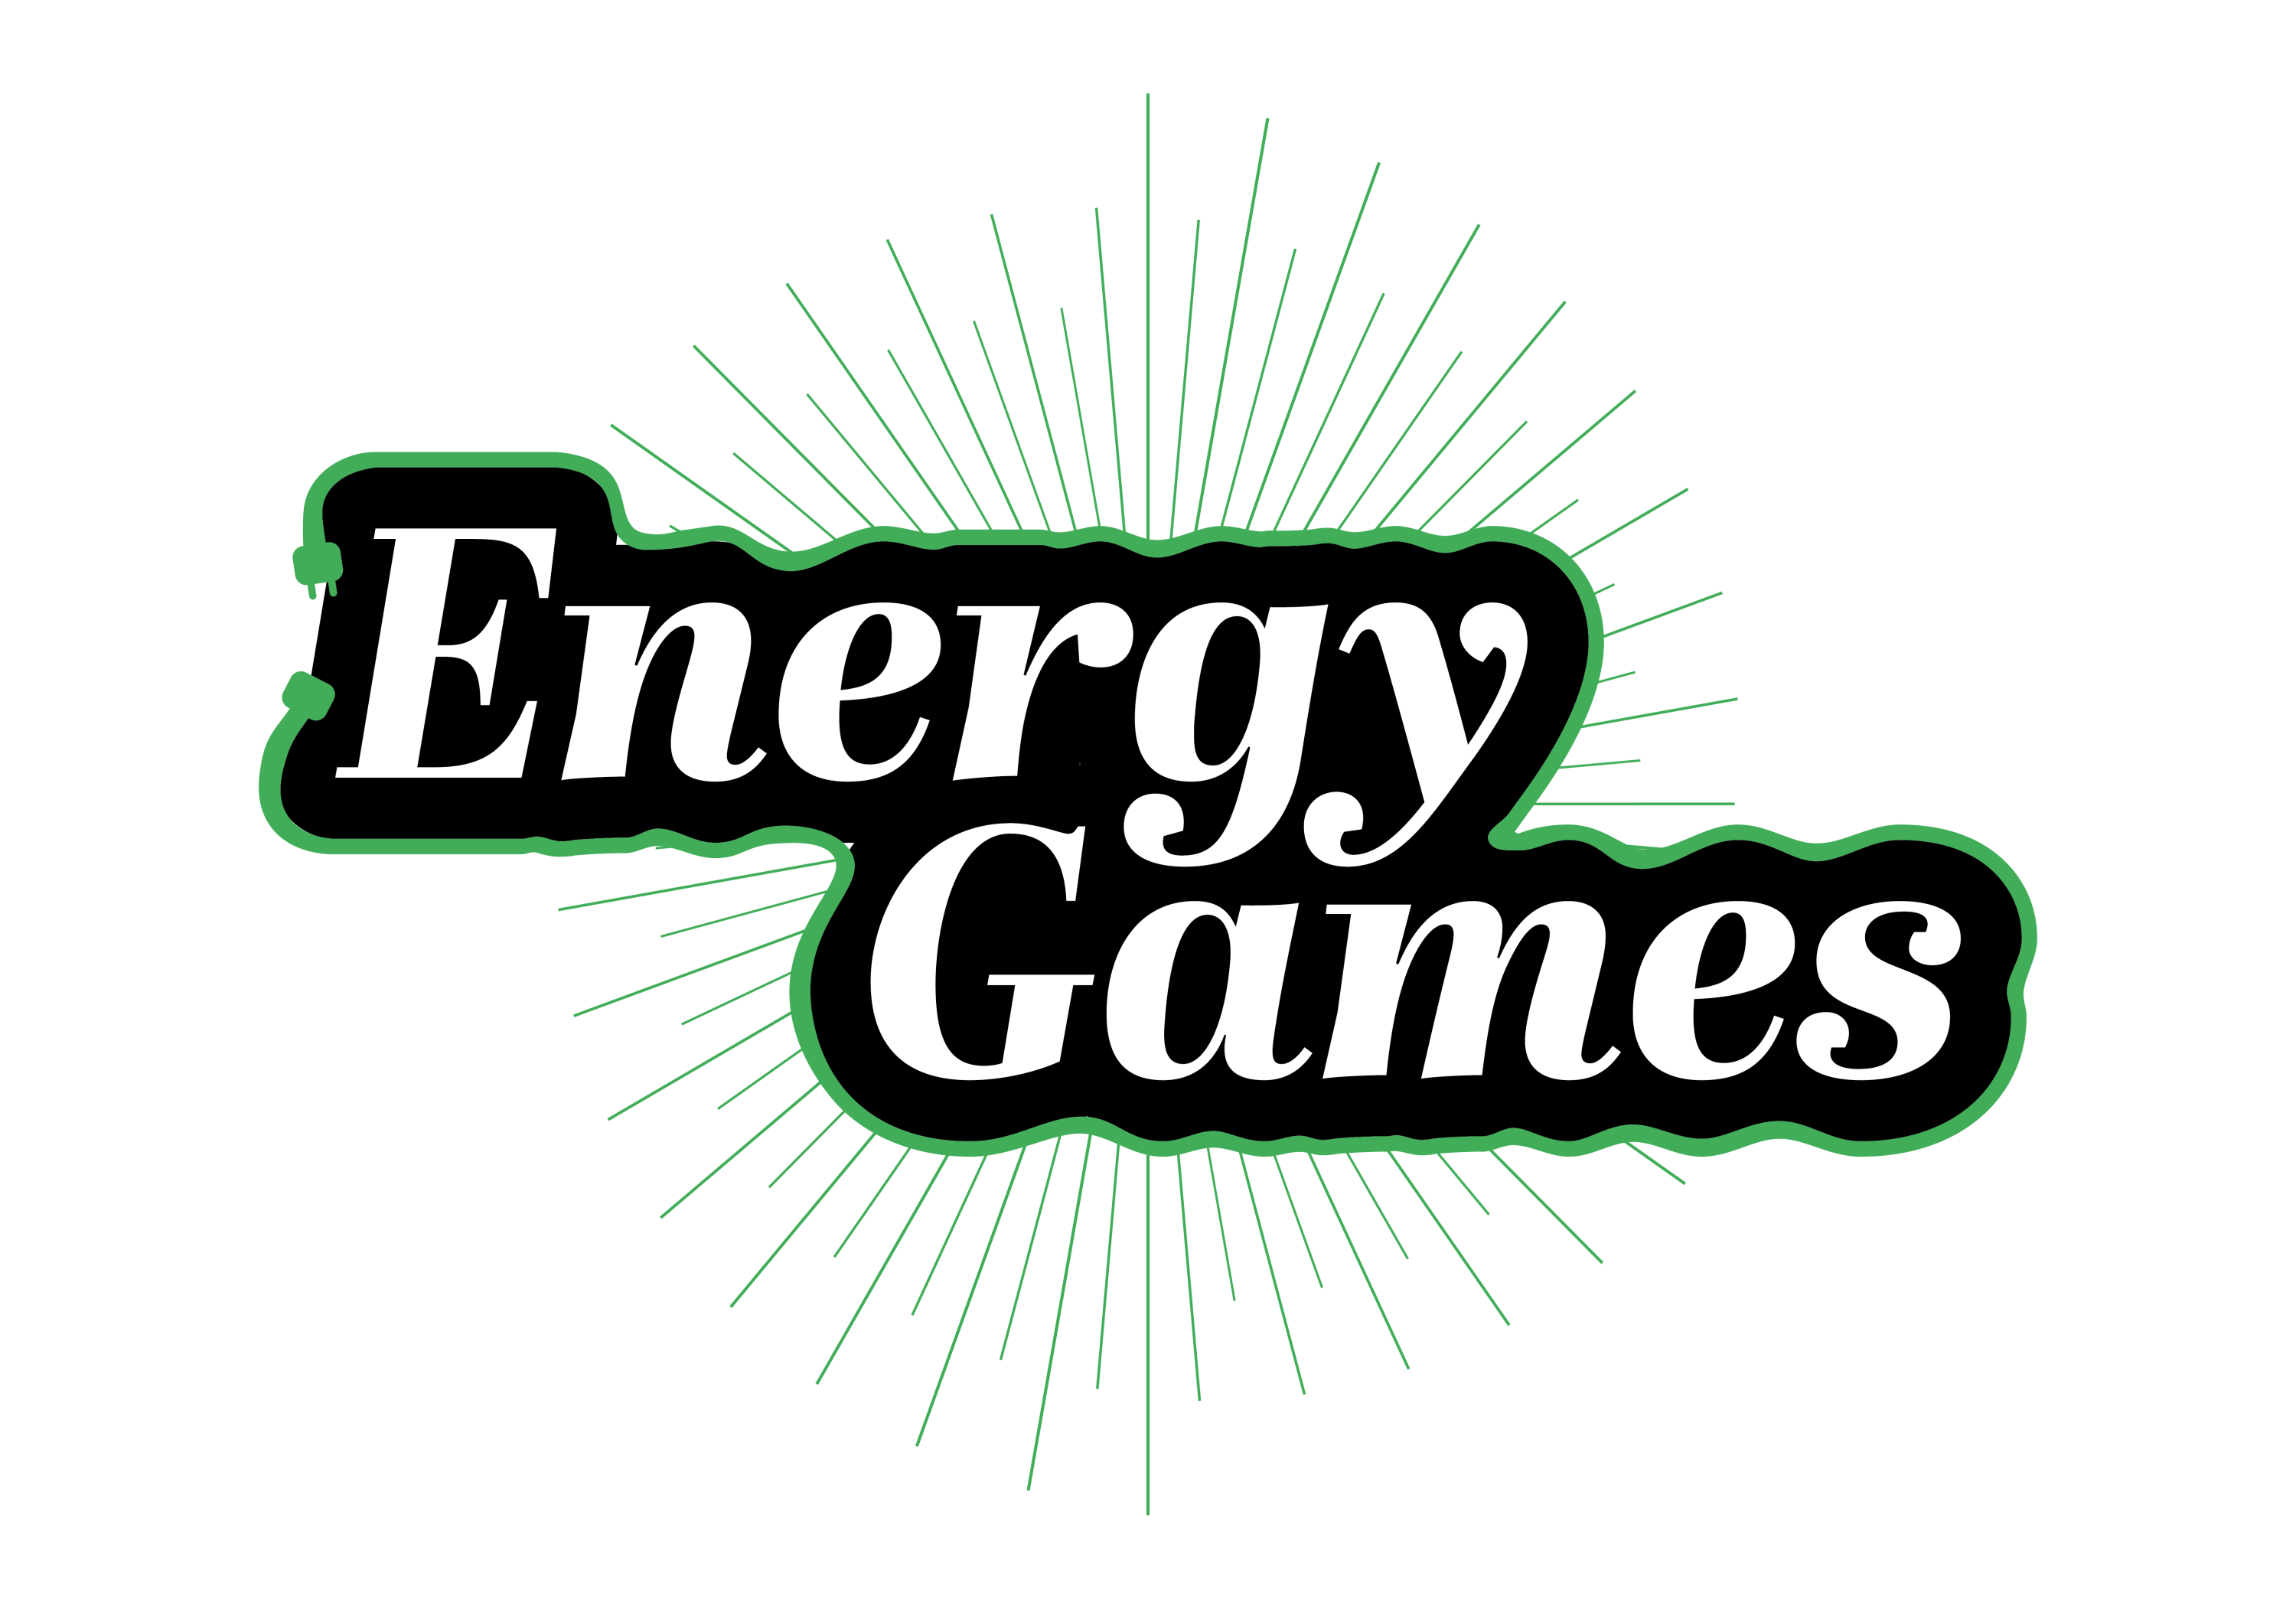 Energy games text with sunburst behind